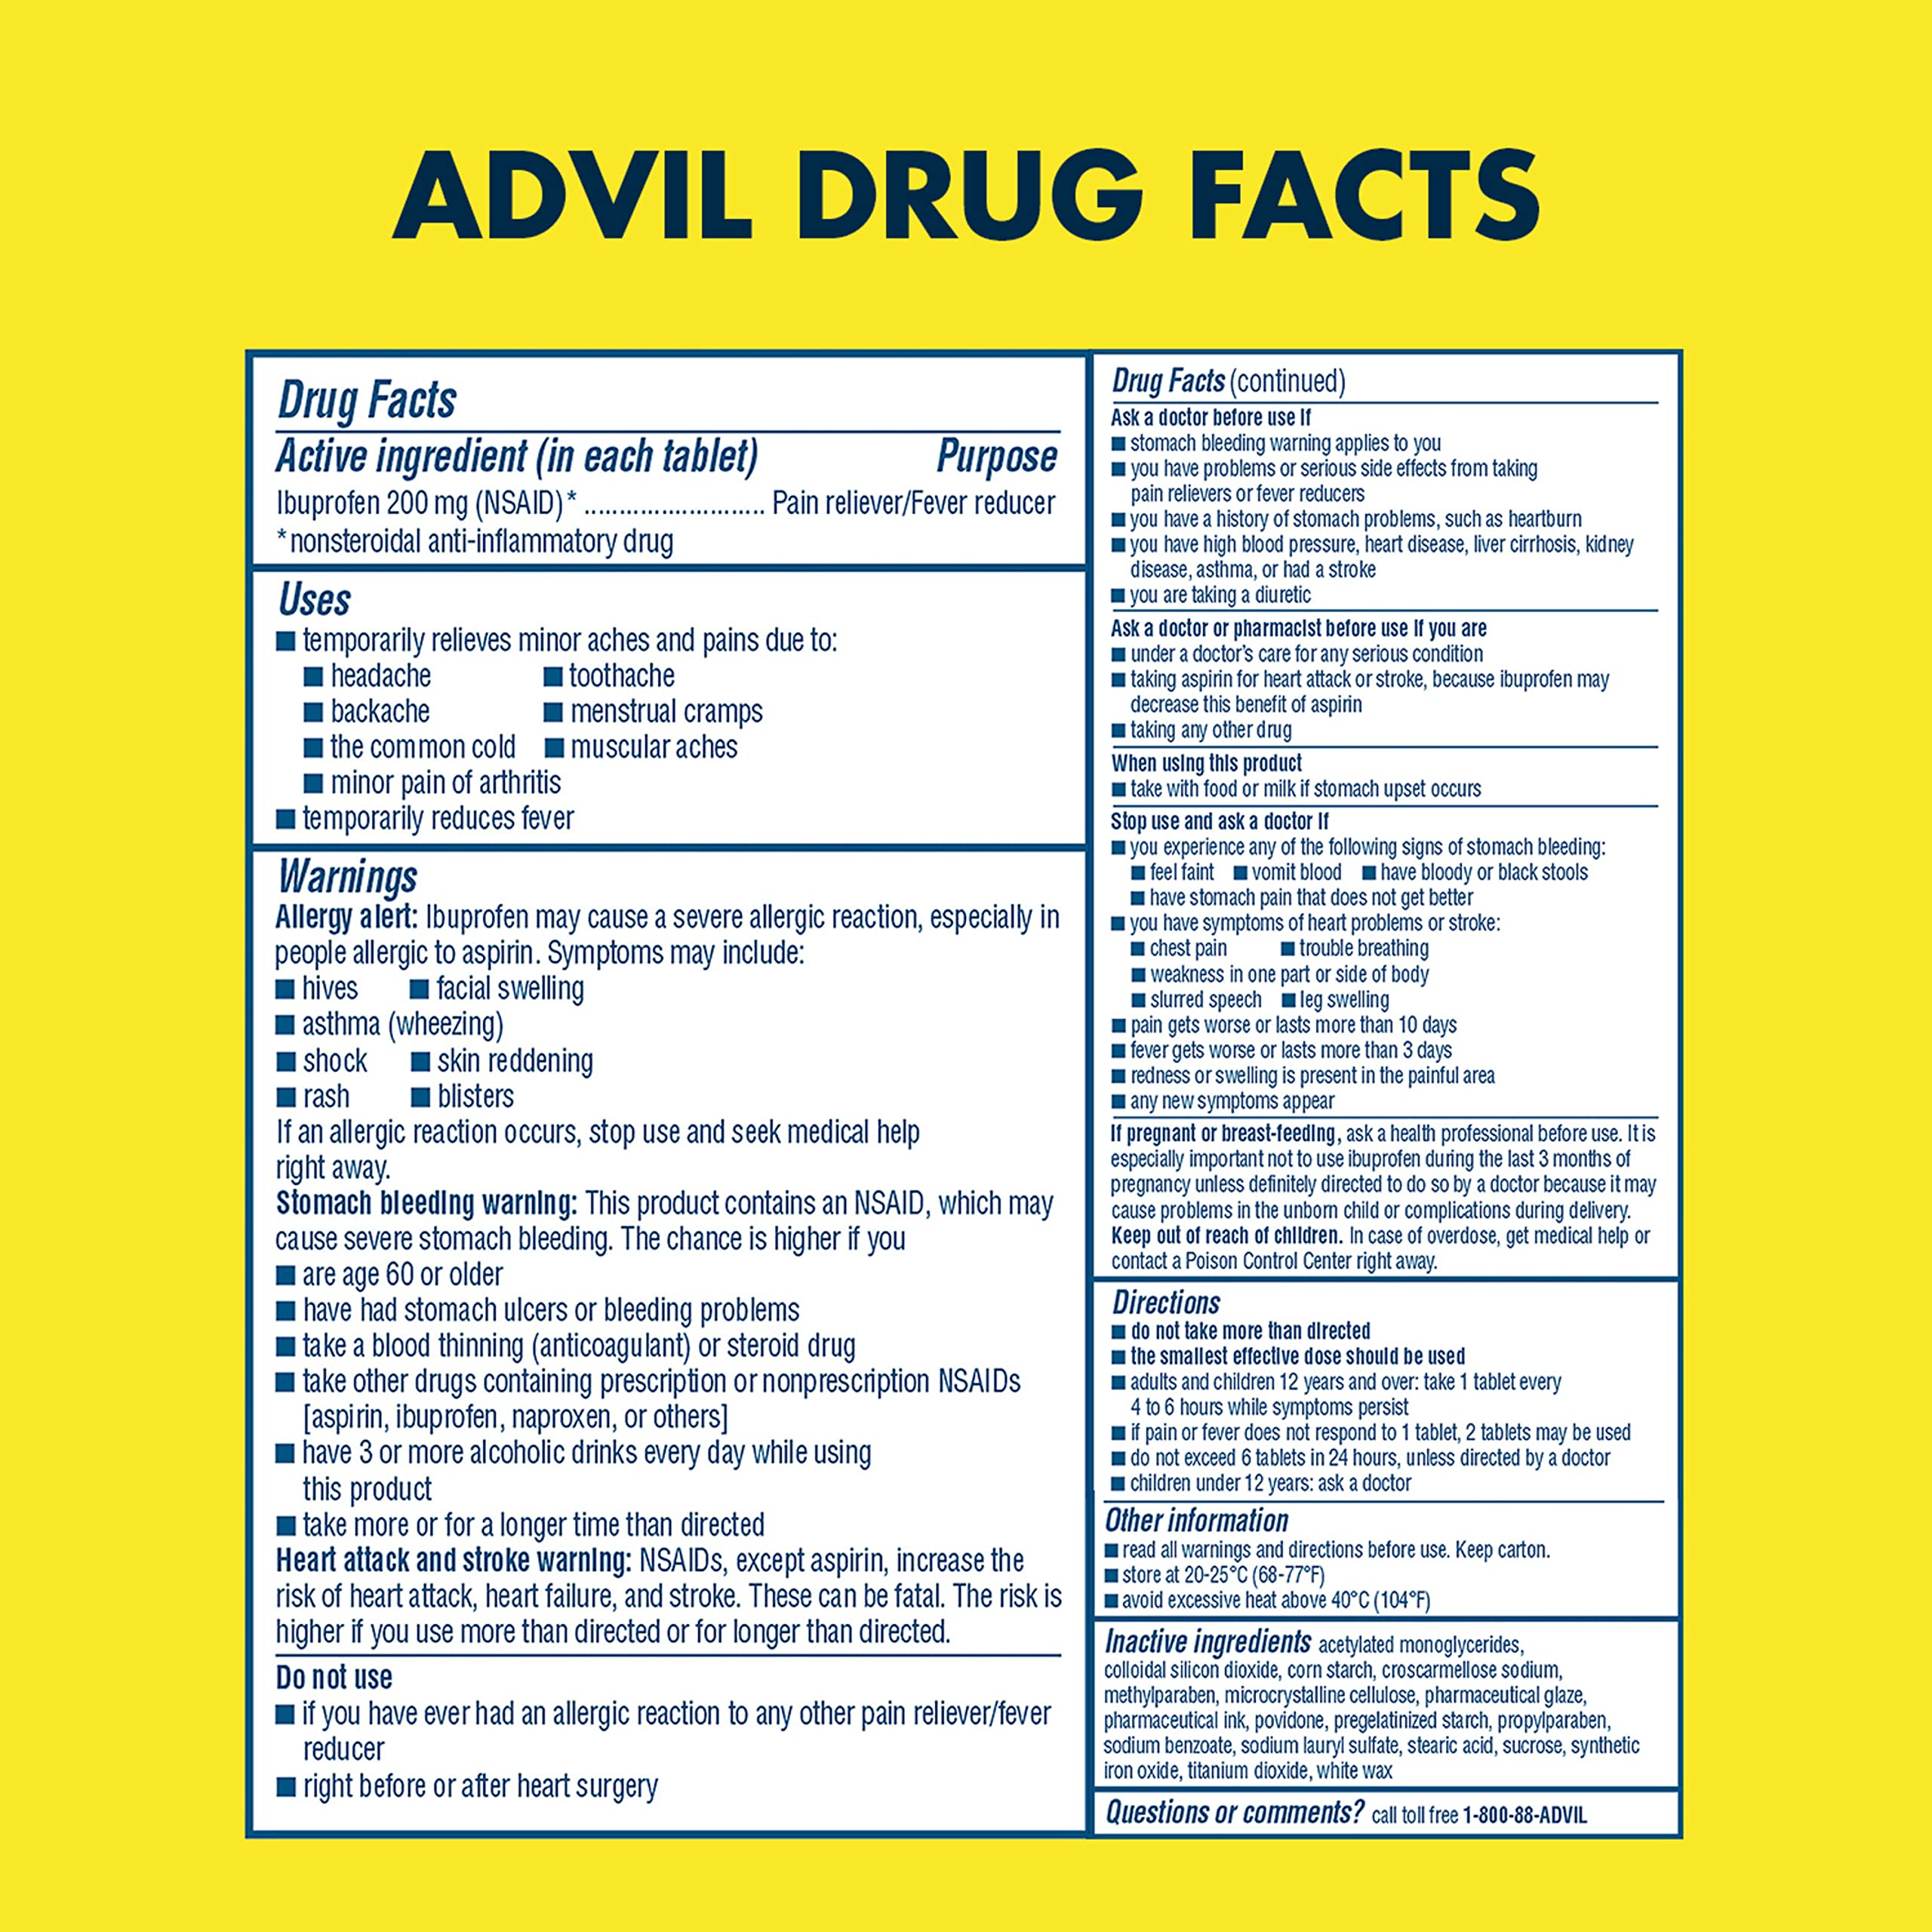 Advil Pain Reliever and Fever Reducer, Ibuprofen 200mg for Pain Relief and Diphenhydramine Citrate - 300 Count, Advil PM Pain Reliever and Nighttime Sleep Aid - 2 Count